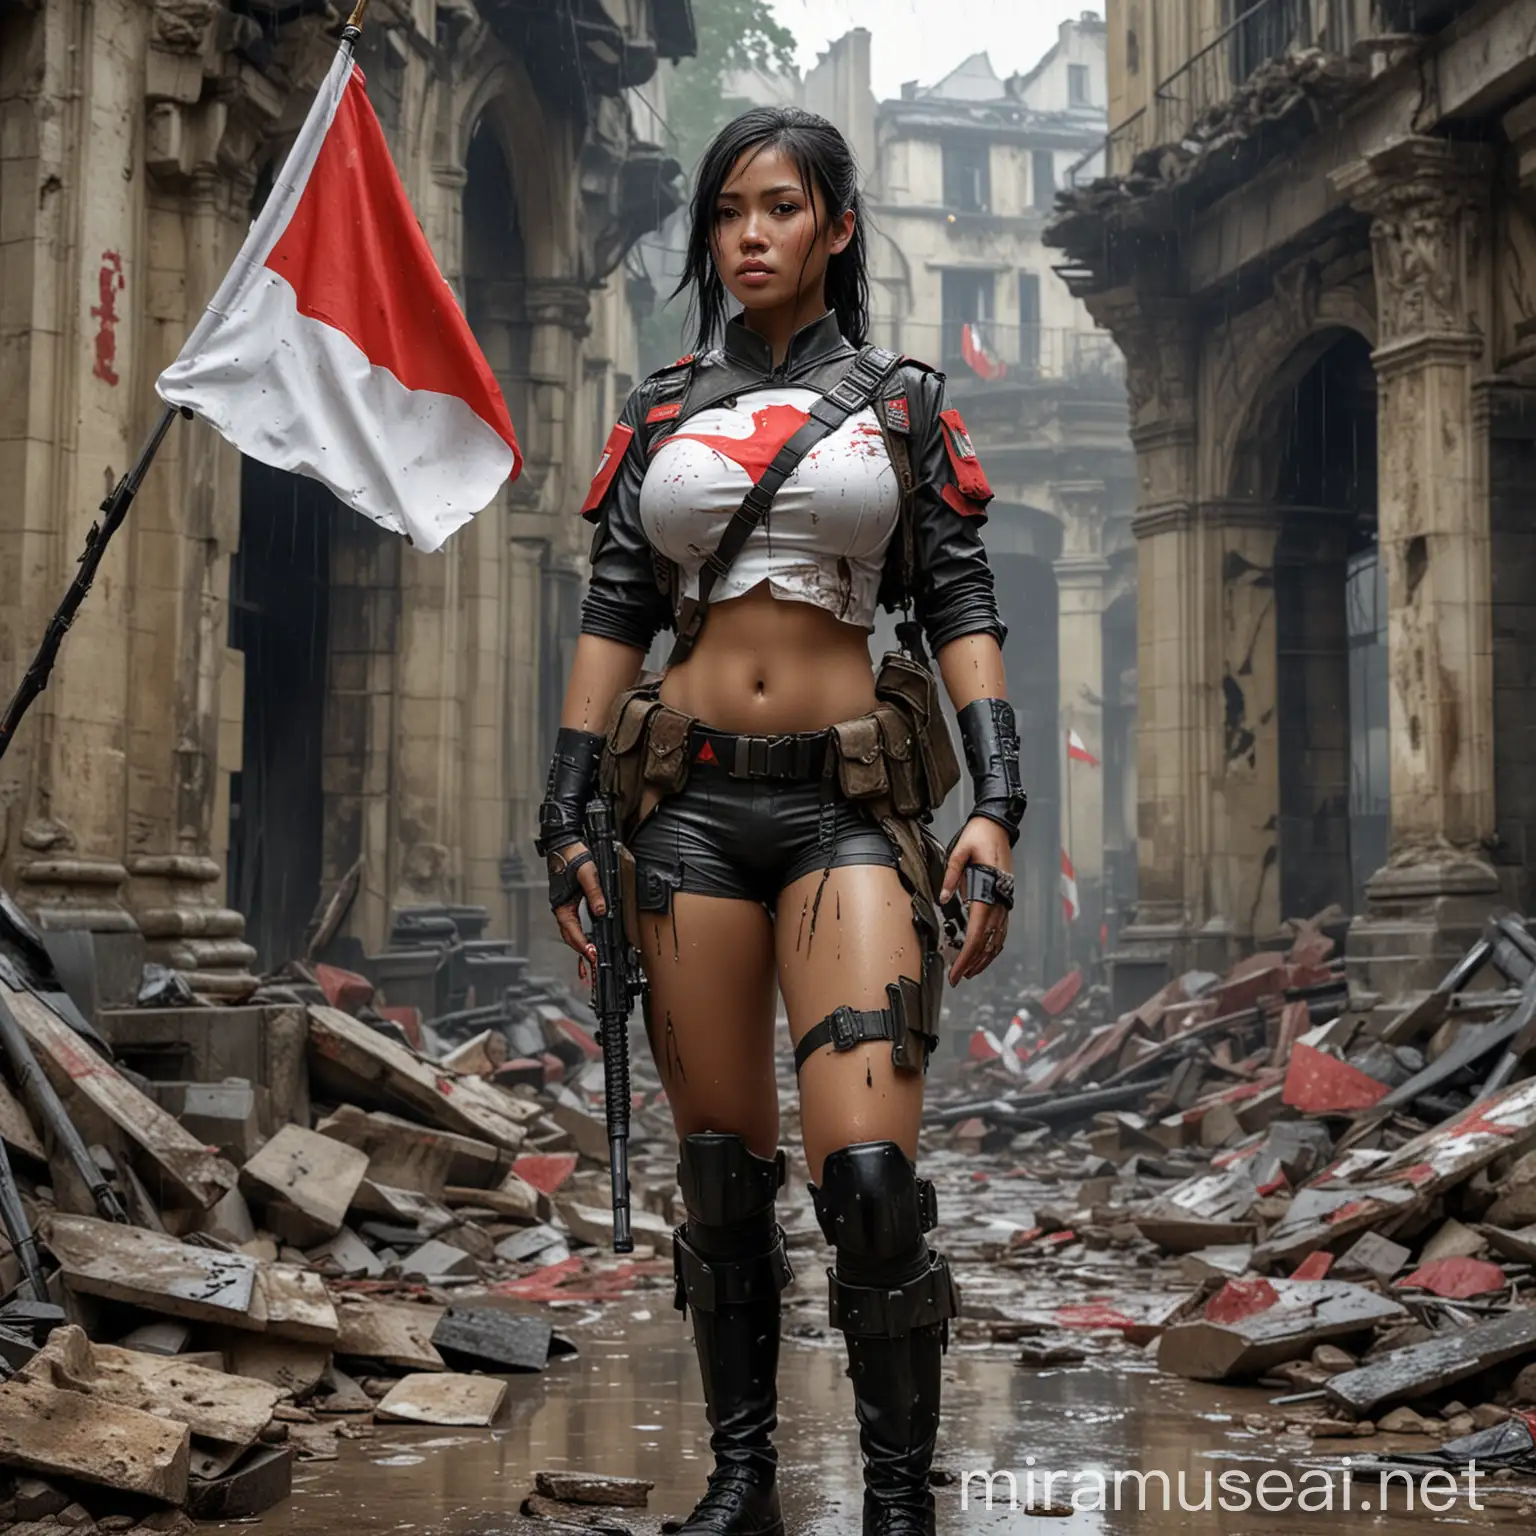 Realistic photo masterpiece, beautiful Indonesian girl, big breasts, wearing combat uniform complete with weapons on her waist and back, carrying the Indonesian flag color red and white, standing among the ruins in the city of Paris, rain, detailed, realistic.